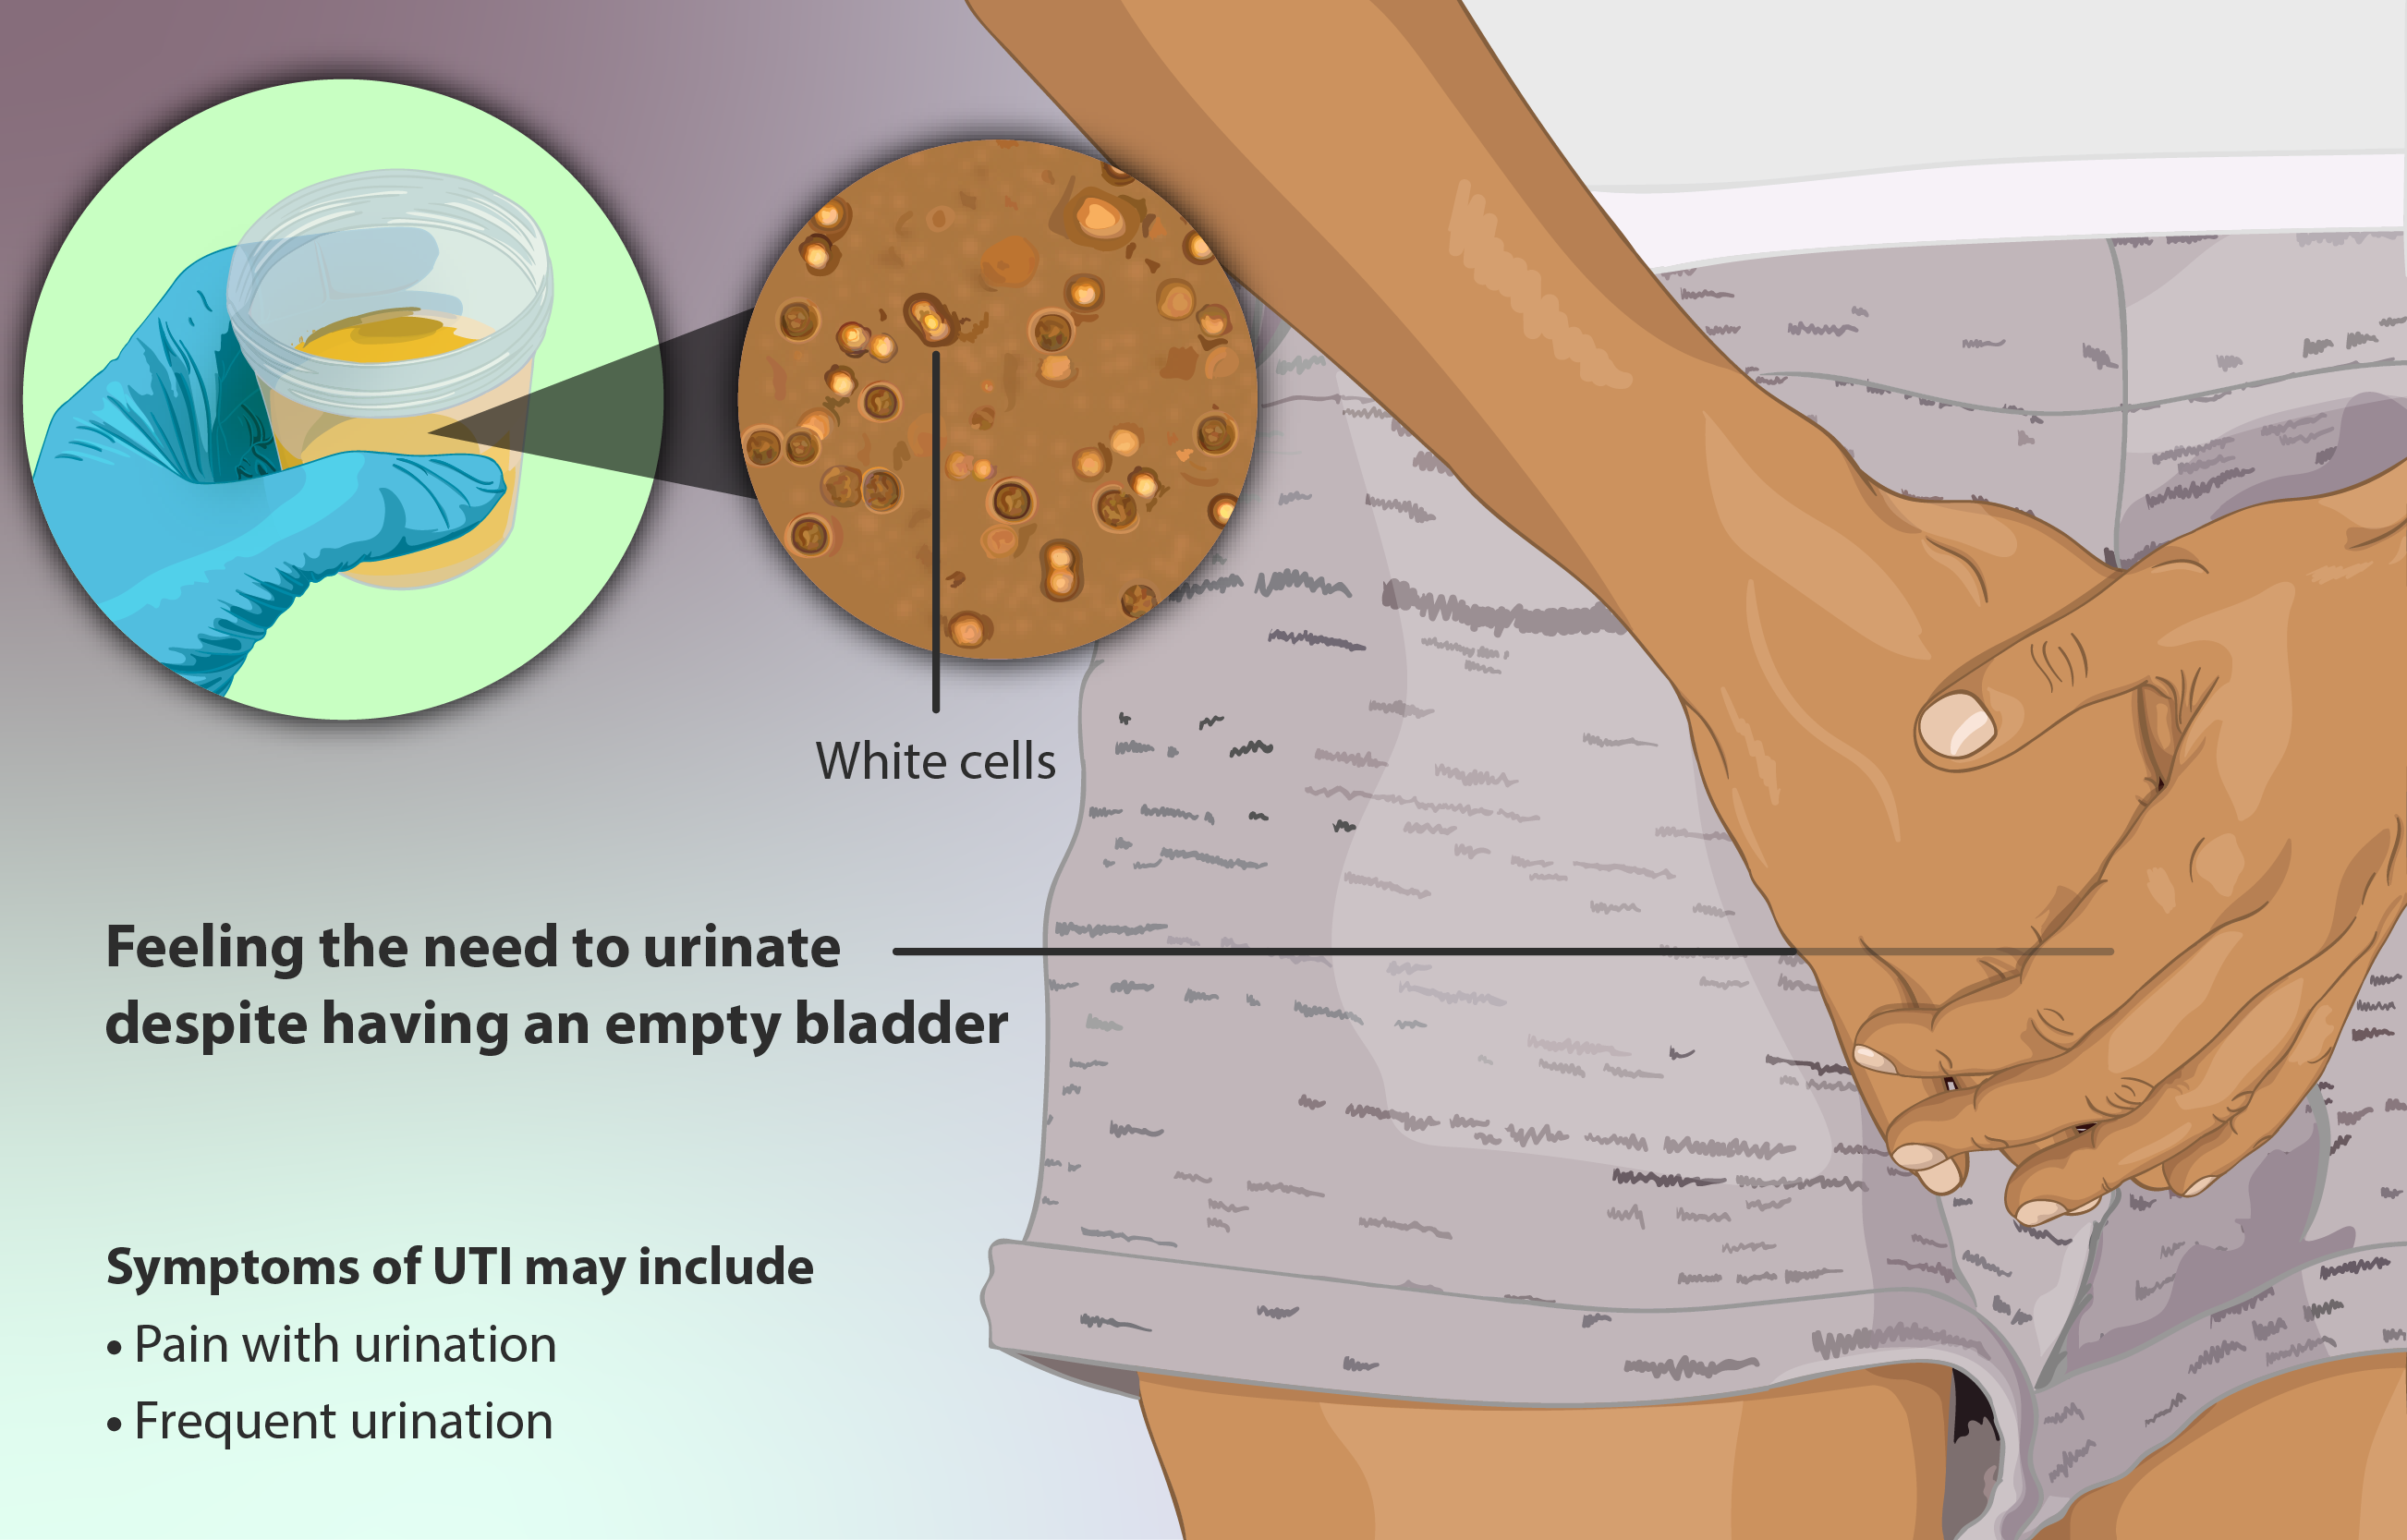 File:Depiction of a lady who has a Urinary Tract Infection (UTI).png -  Wikimedia Commons